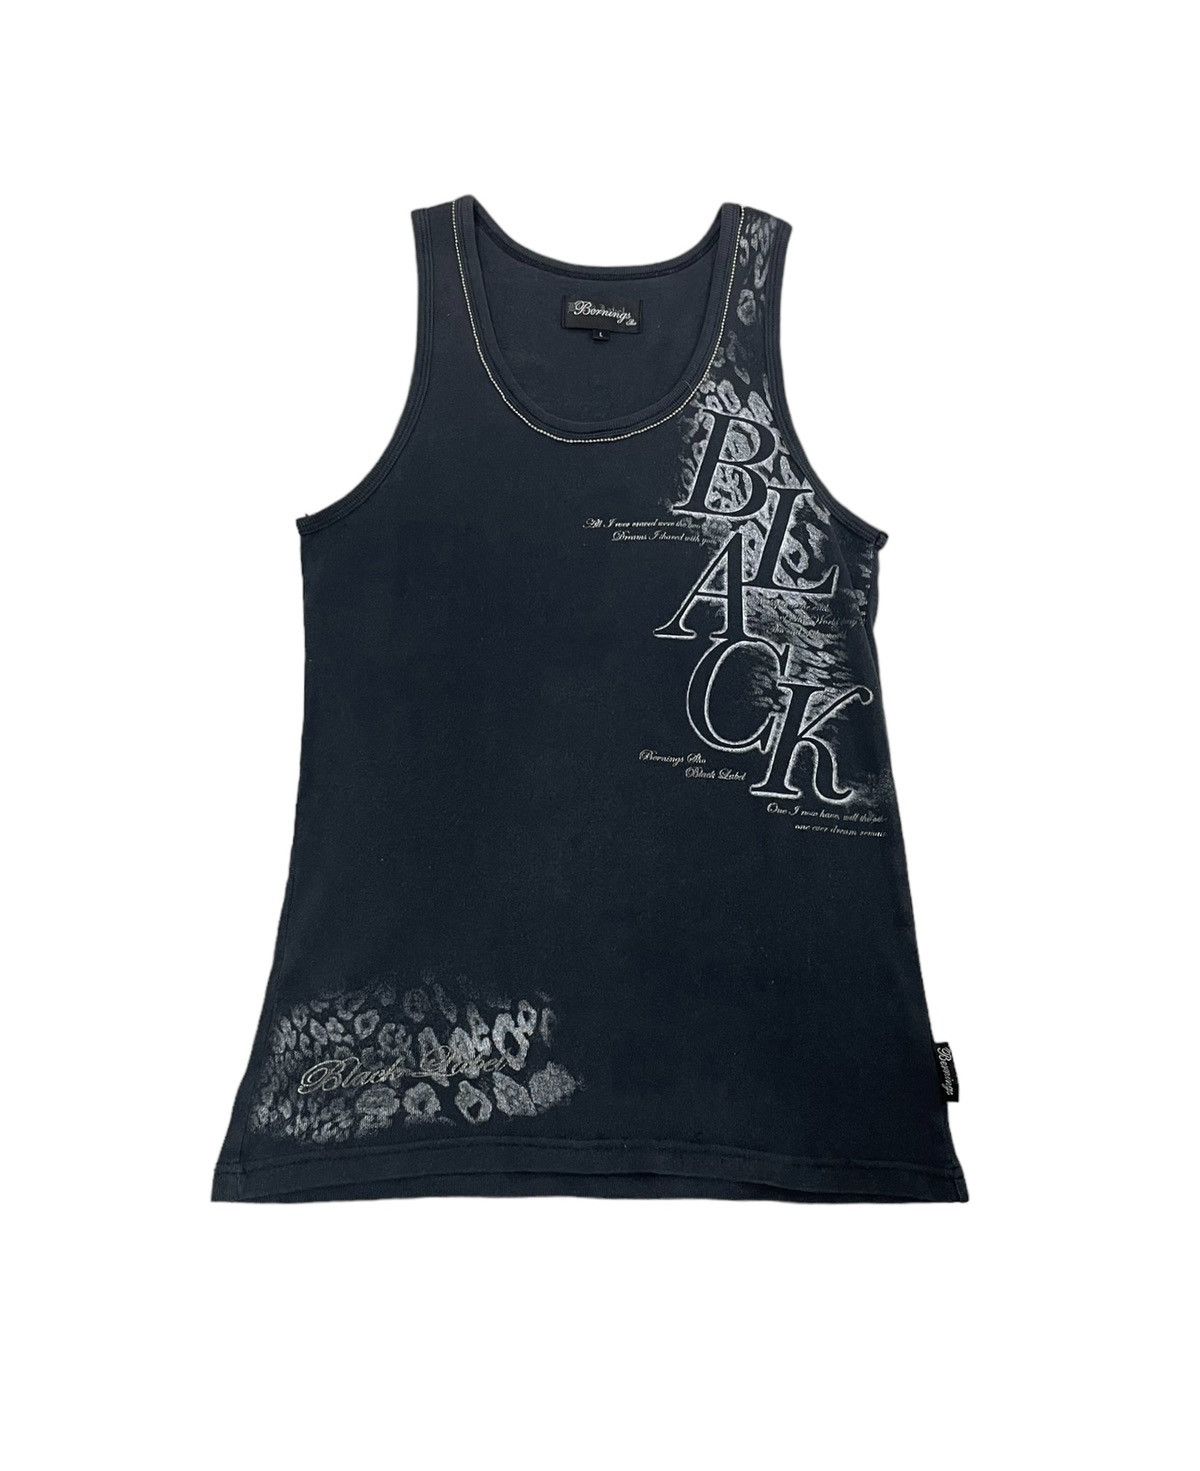 00s japanese label gimmick Tank top y2k 信用 - トップス